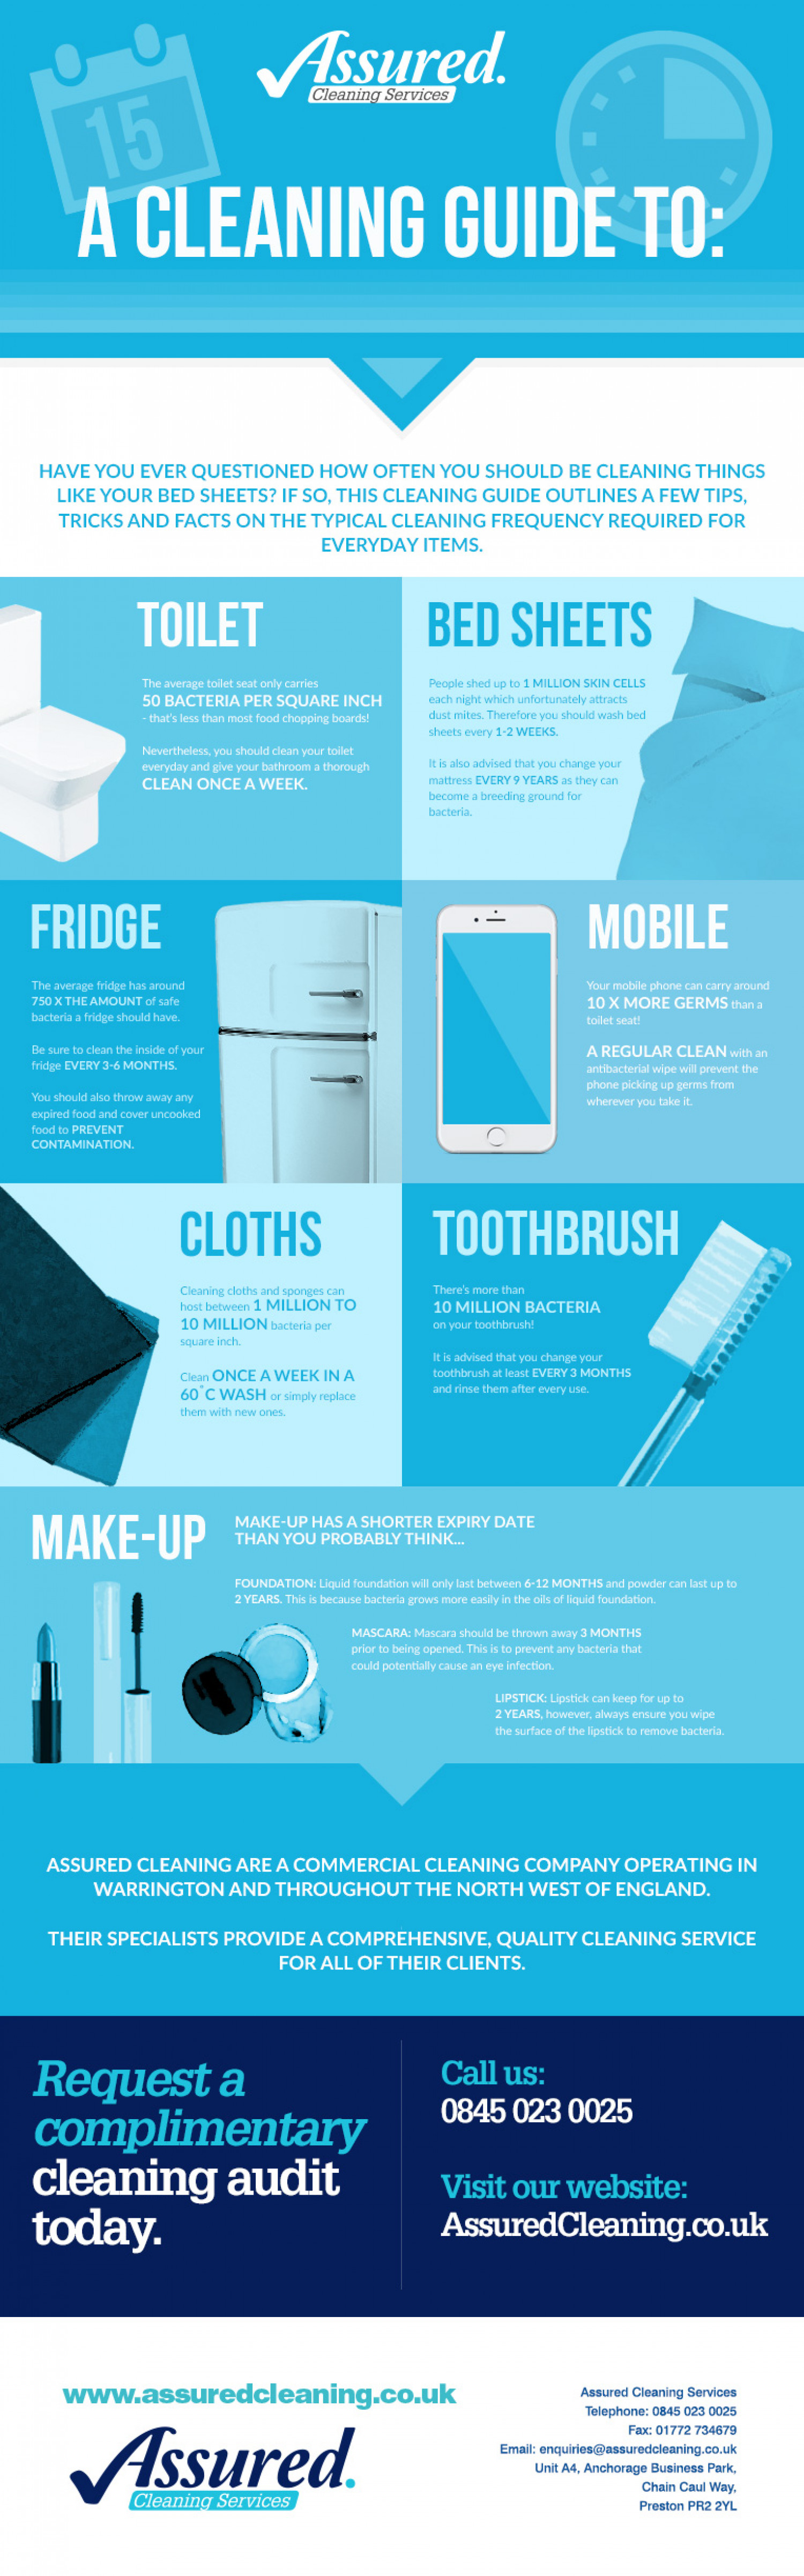 How Often Should You Clean: Cleaning Frequency Guide - Infographic